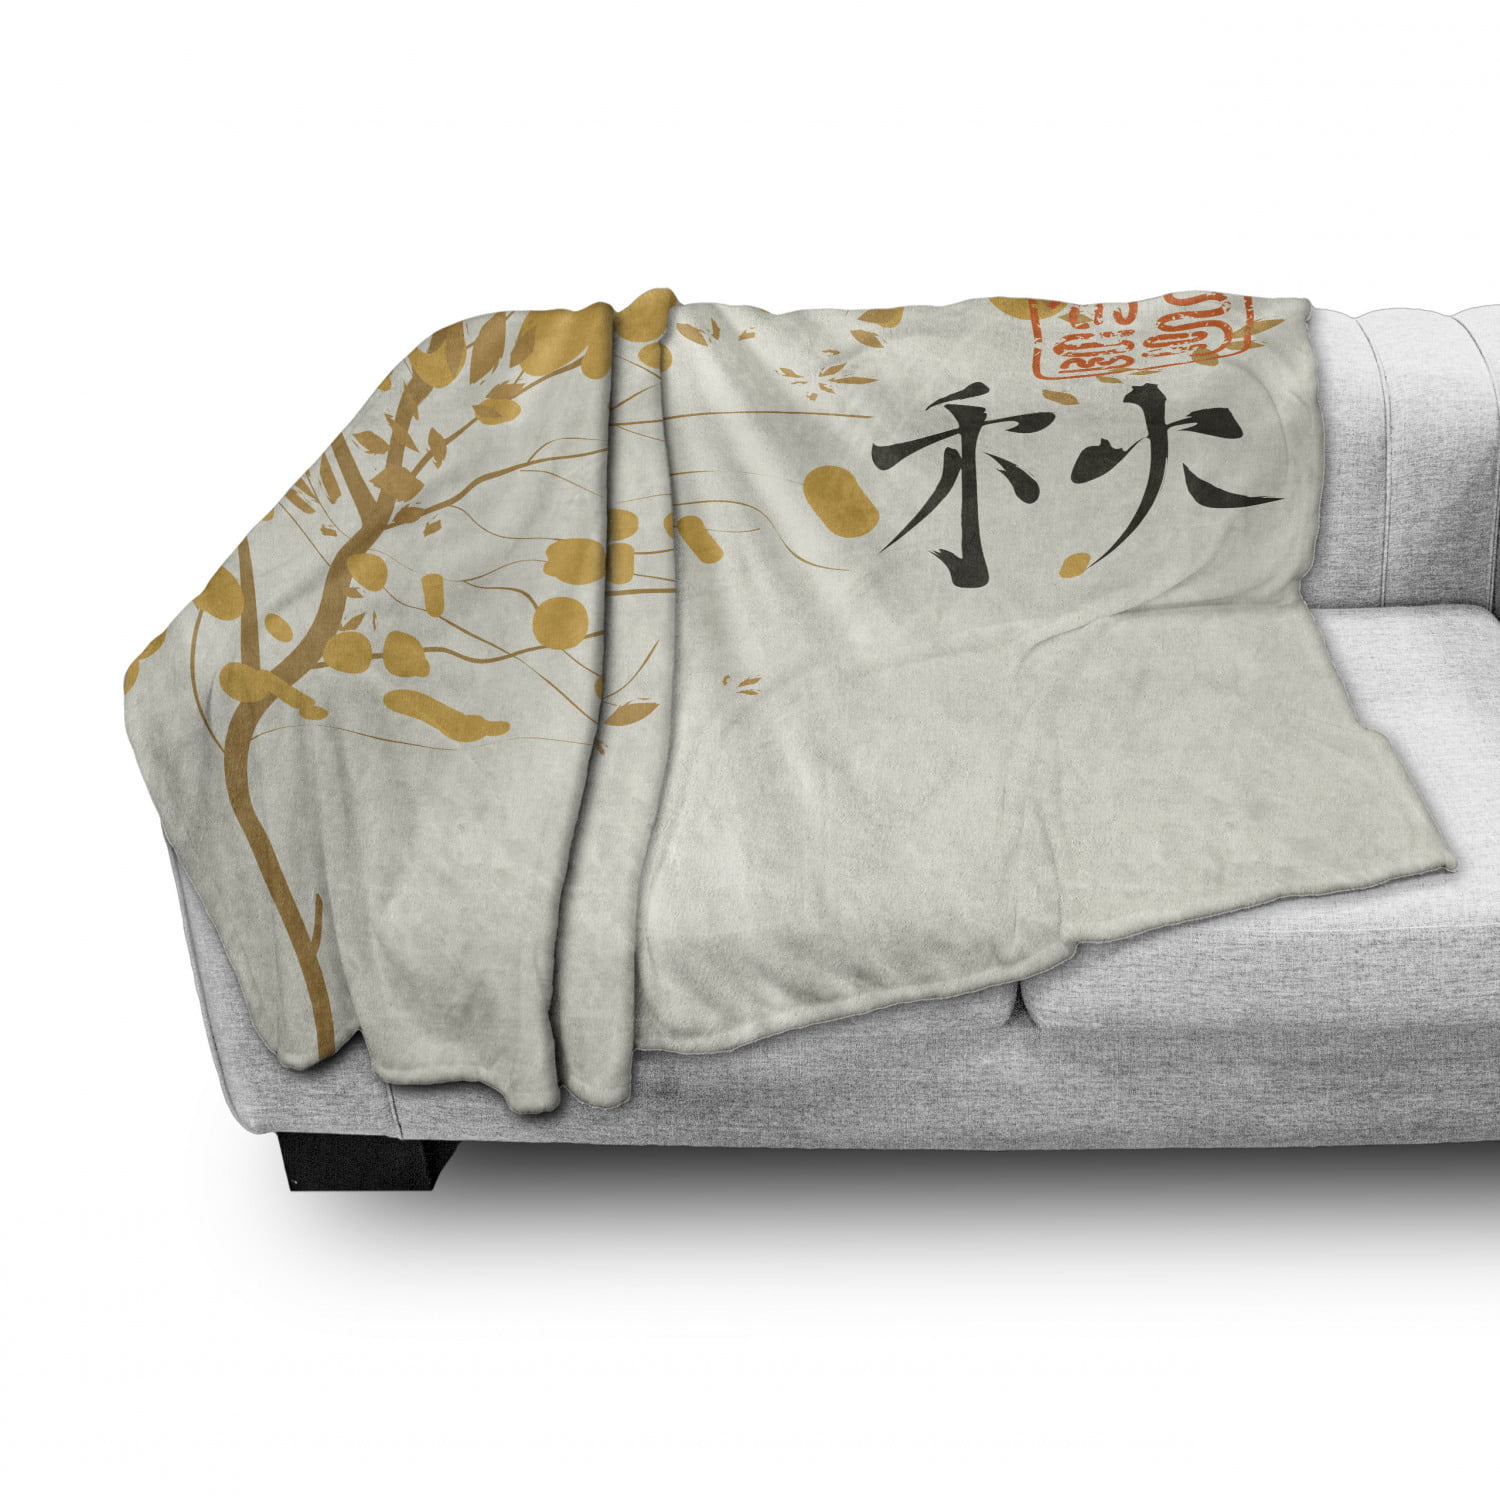 Cozy Plush for Indoor and Outdoor Use Ambesonne Peace Garden Soft Flannel Fleece Throw Blanket Pale Orange Pale Brown Japanese Inspired Theme Hieroglyph and Abstract Tree Botanical 70 x 90 